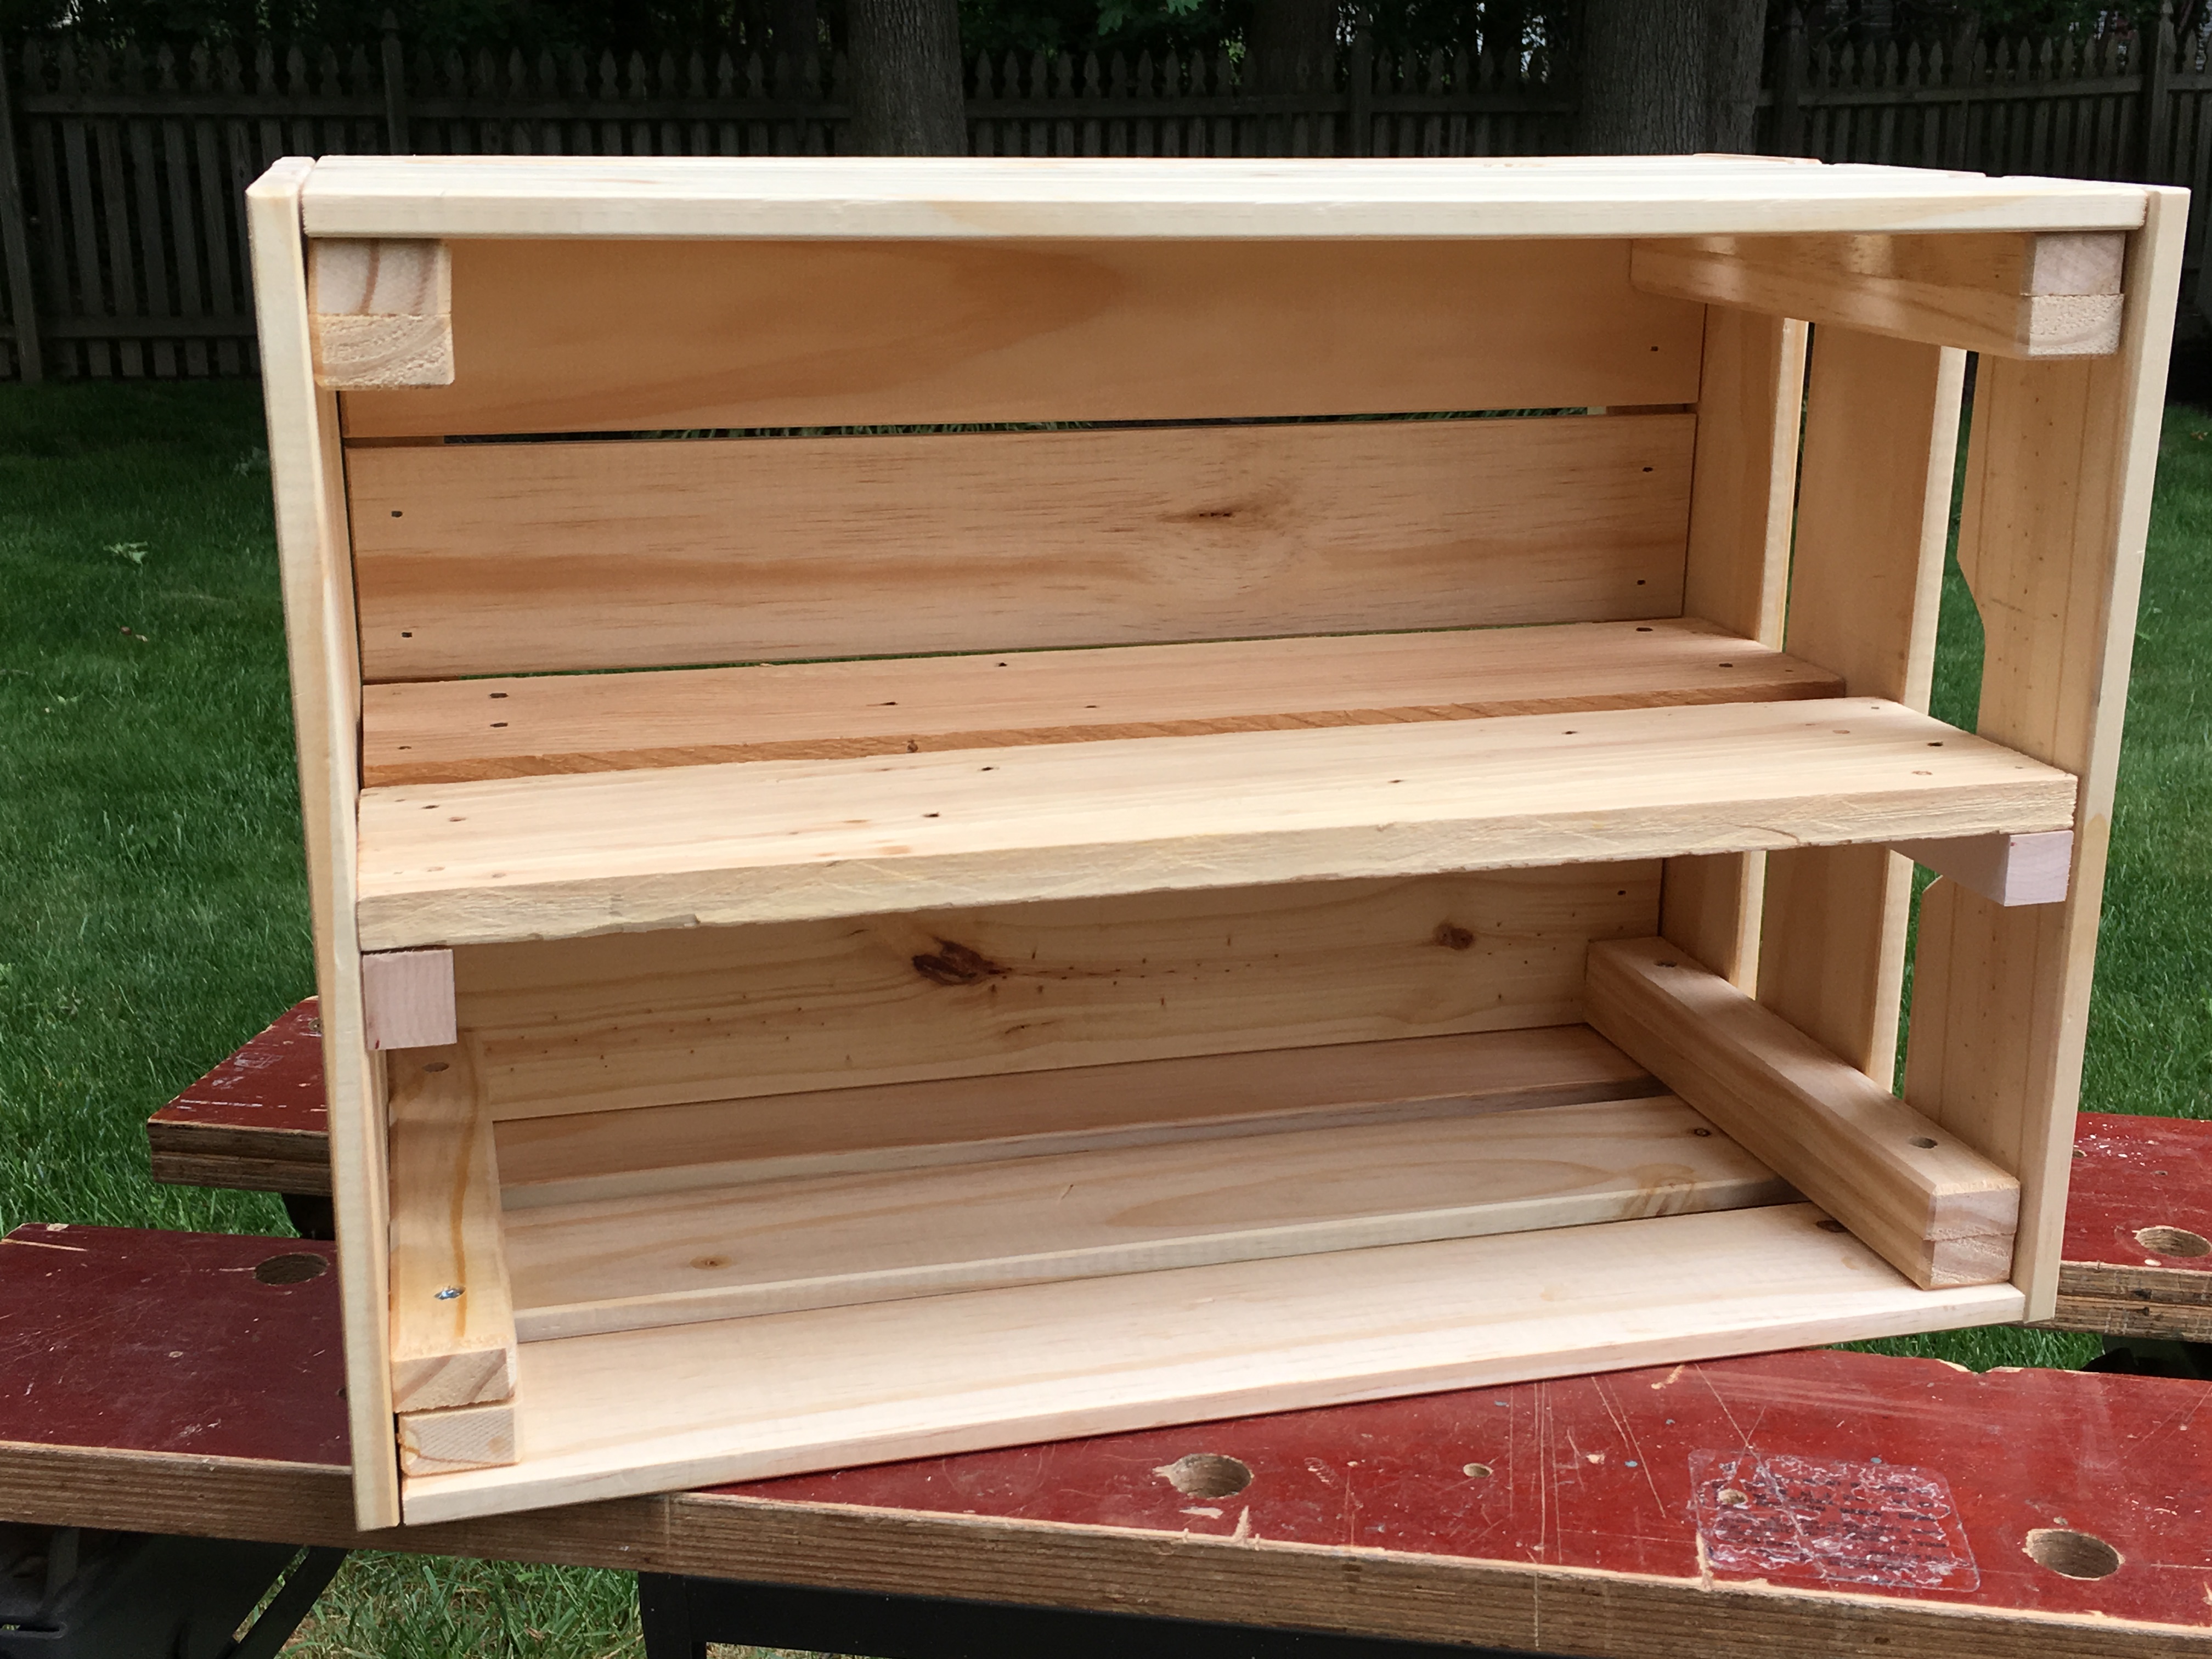 How To Create A Shelf In Wooden Crate